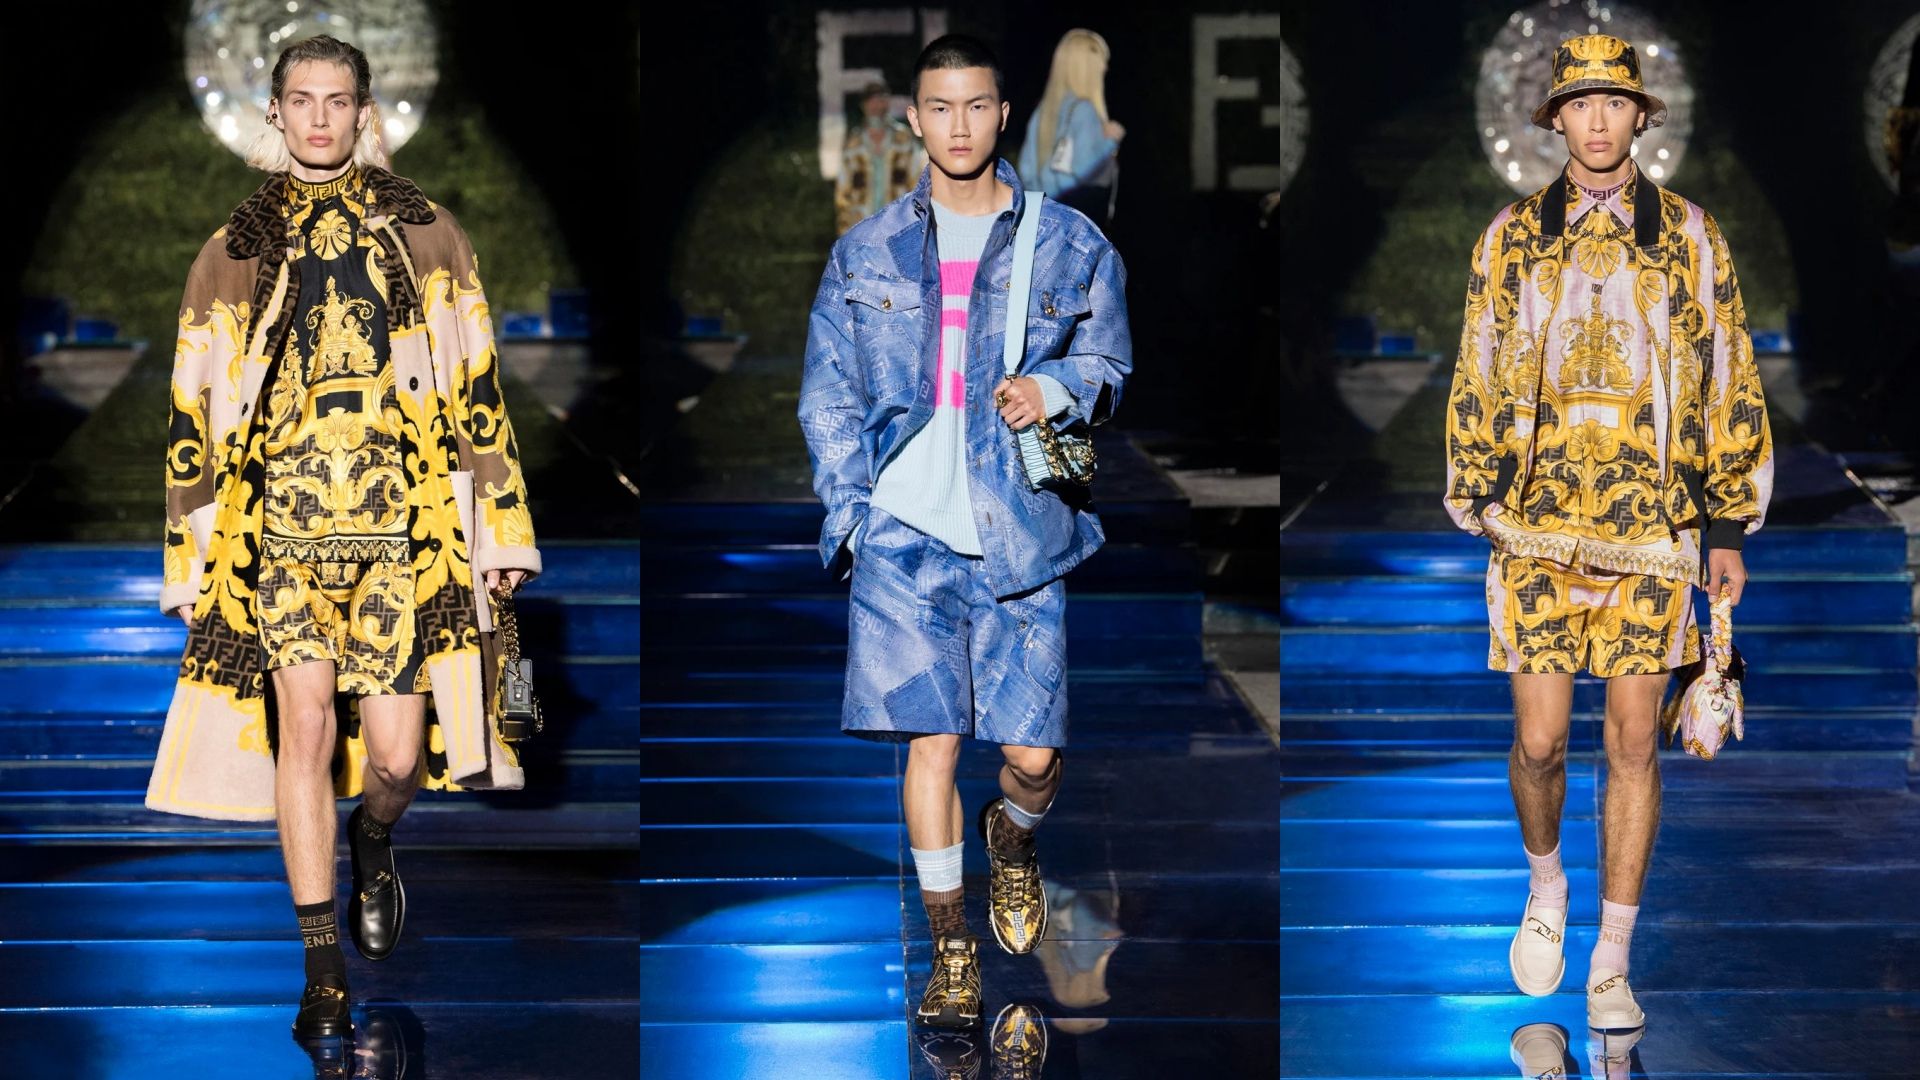 Fendi and Versace 'Fendace' collection available from 12 May